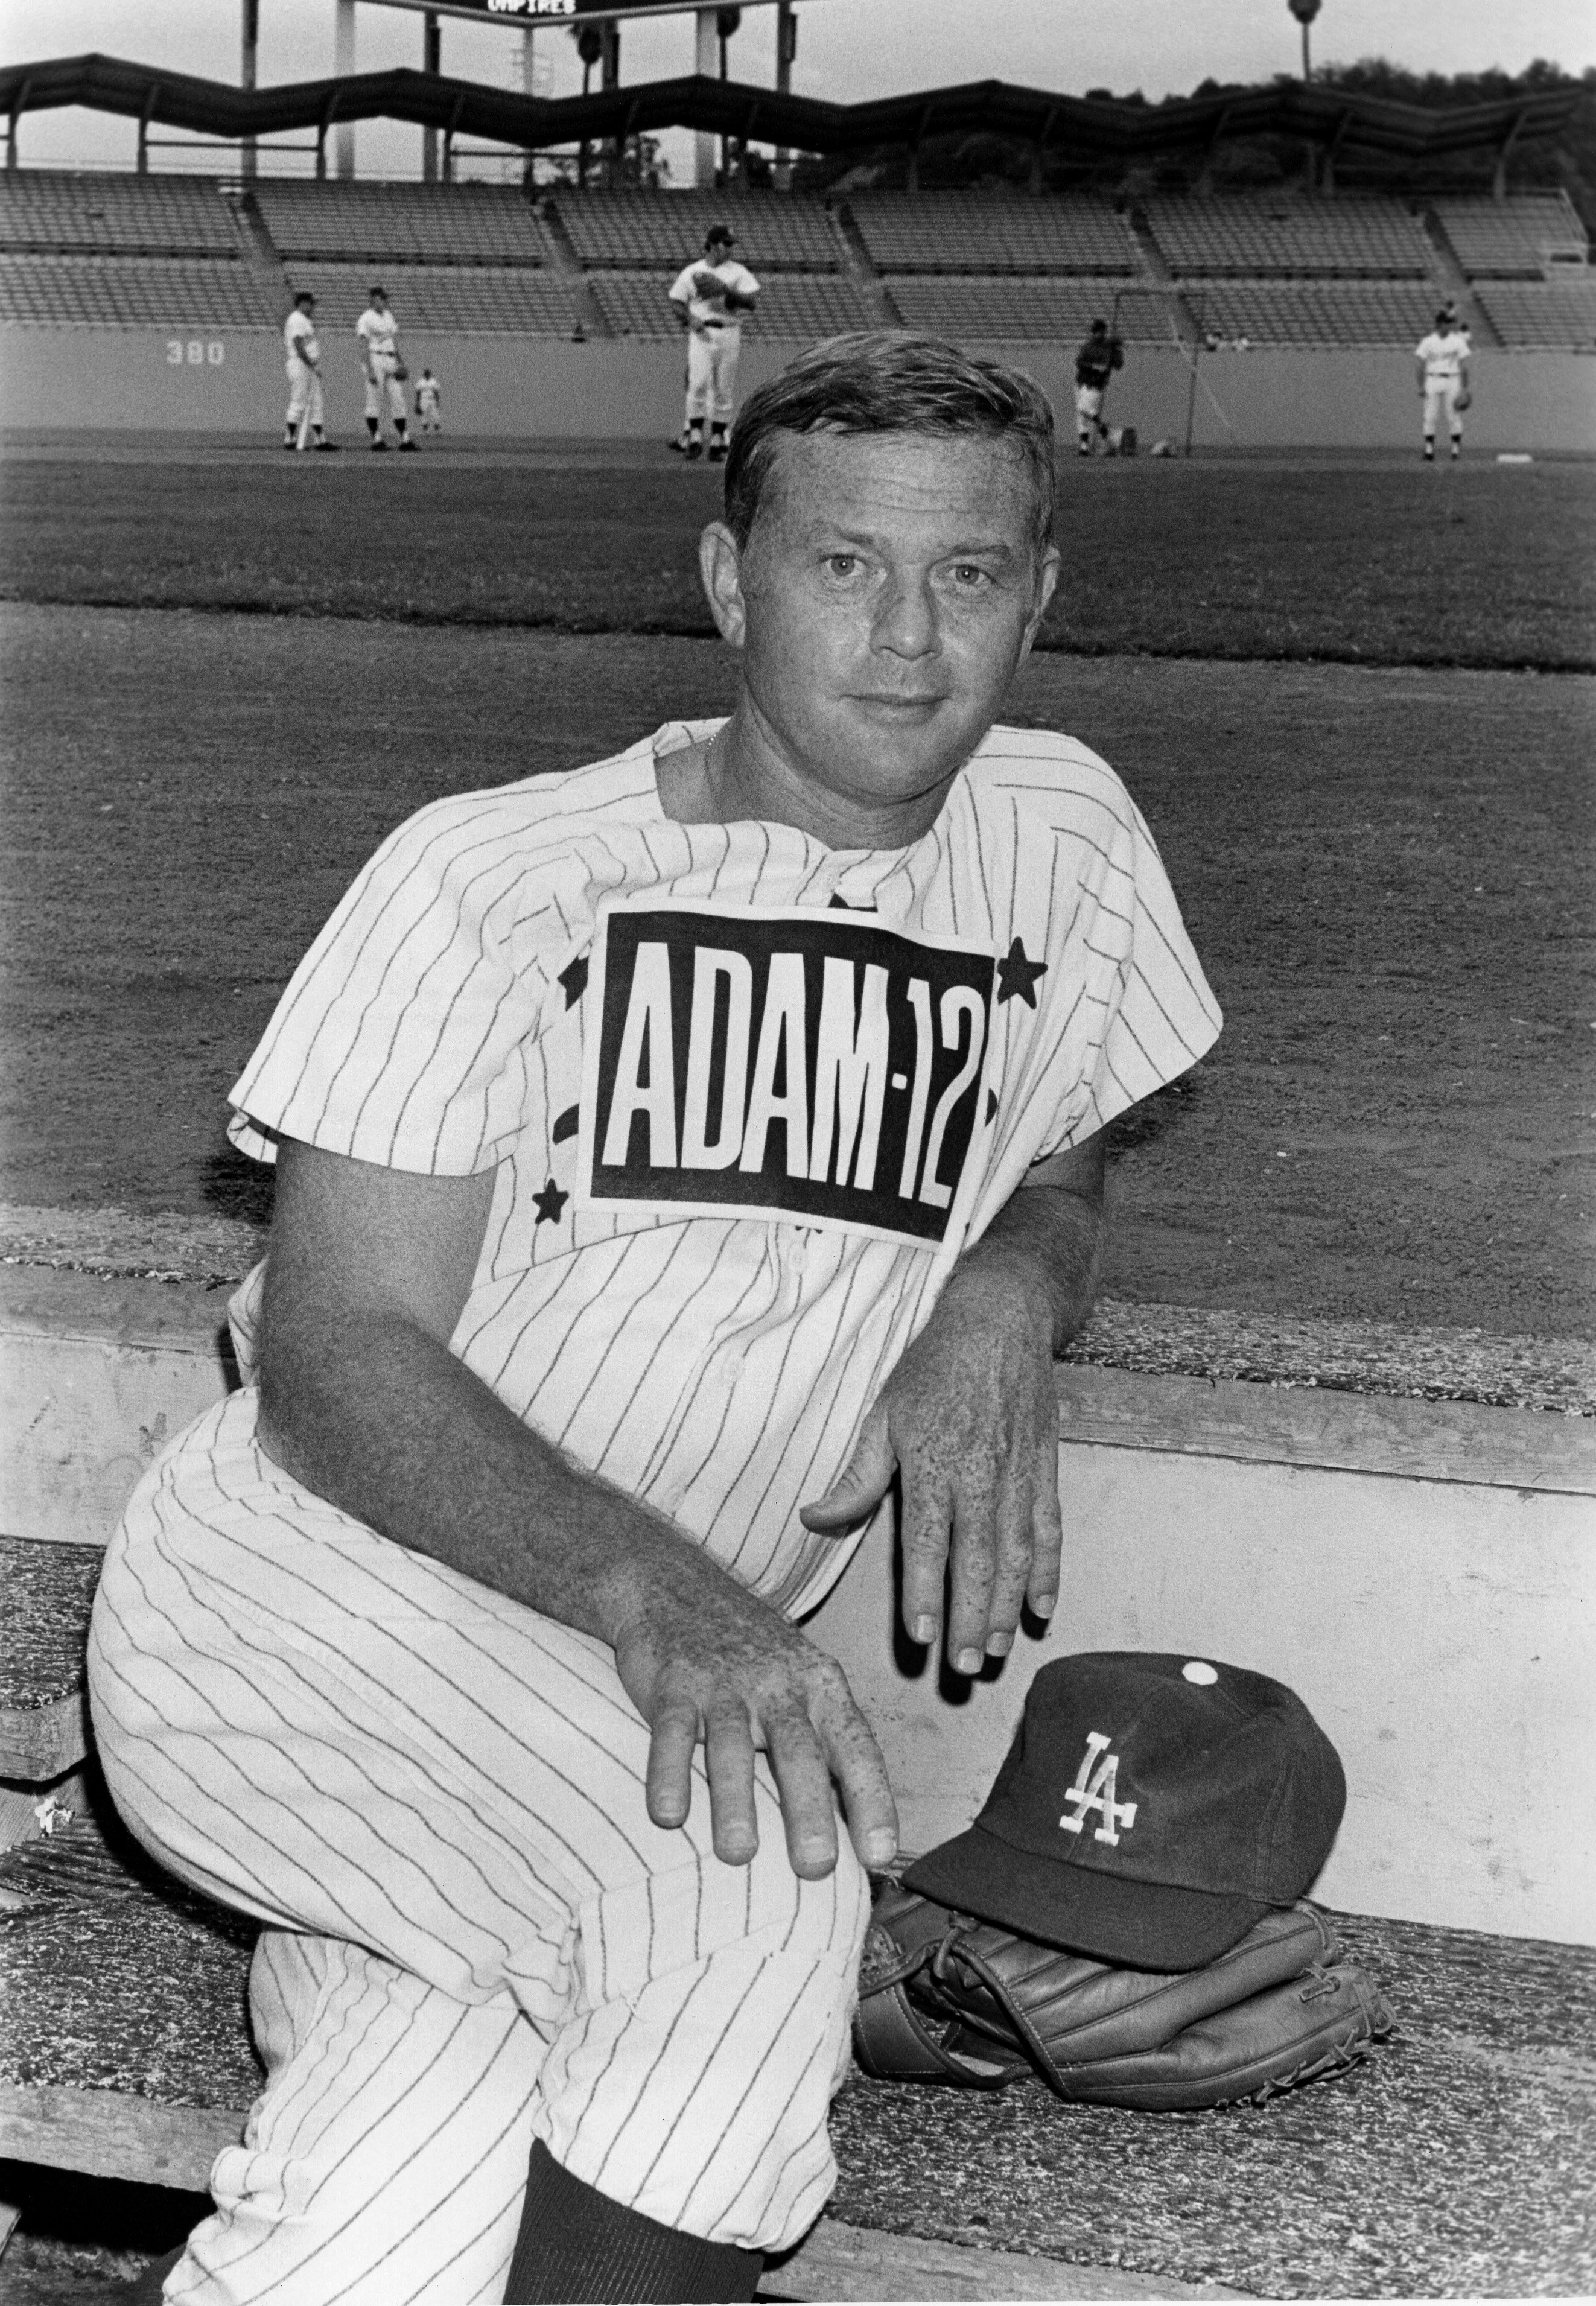 Martin Milner co-star of the hit 1970's TV show <i>Adam 12</i> poses for a photo before a charity baseball game against real cops on Sept. 5, 1972 at Dodger Stadium in Los Angeles. (Michael Ochs Archives/Getty Images)